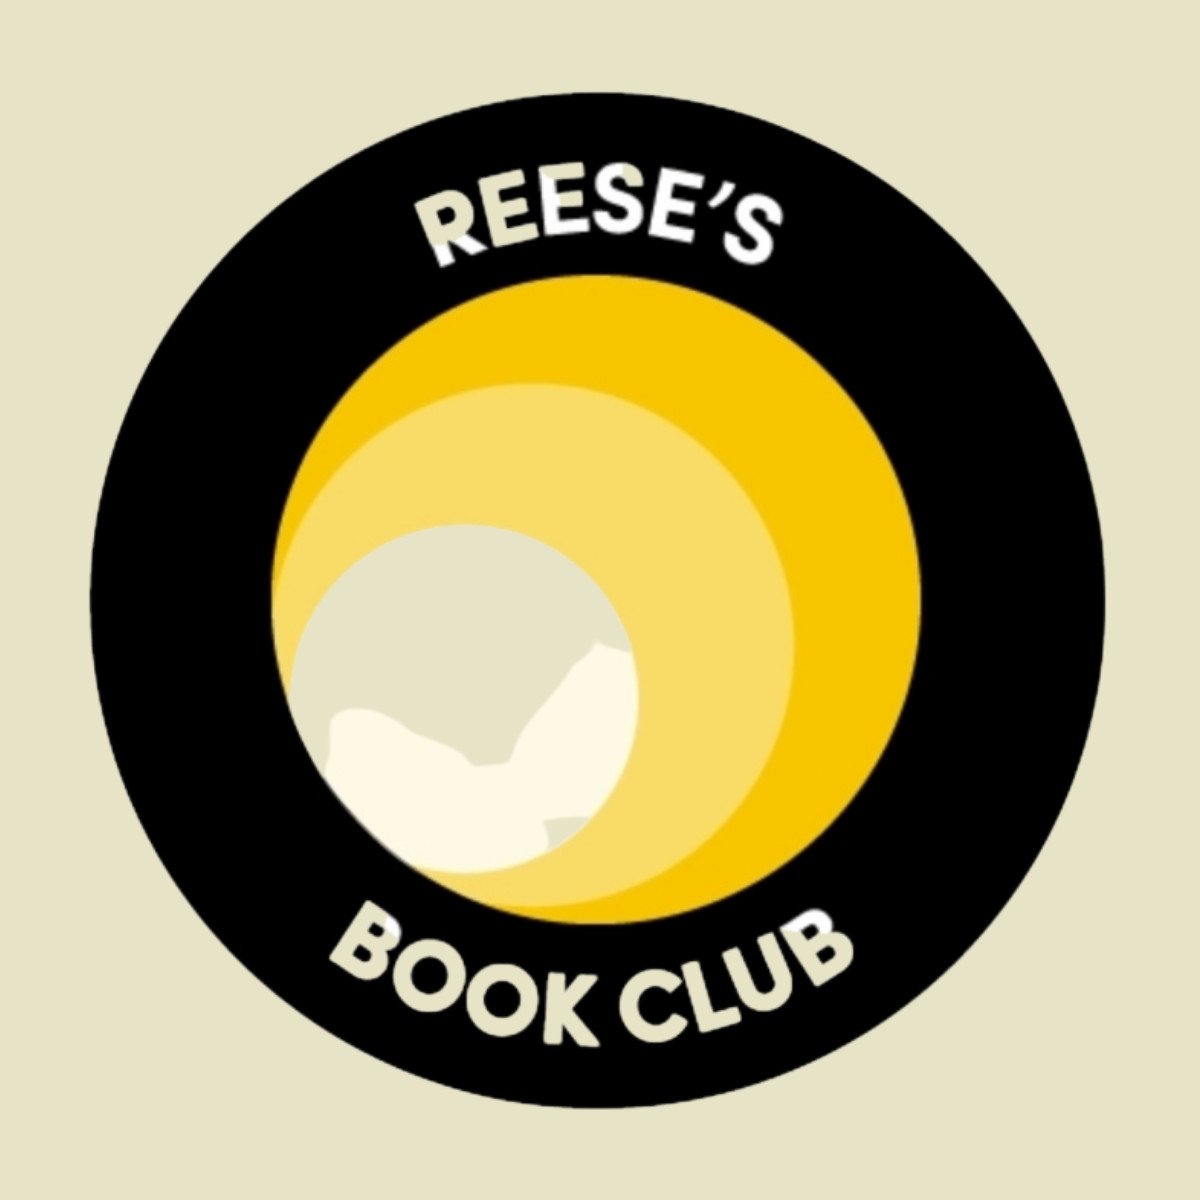 Full Reese Witherspoon Book Club List + PDF (Updated Monthly)